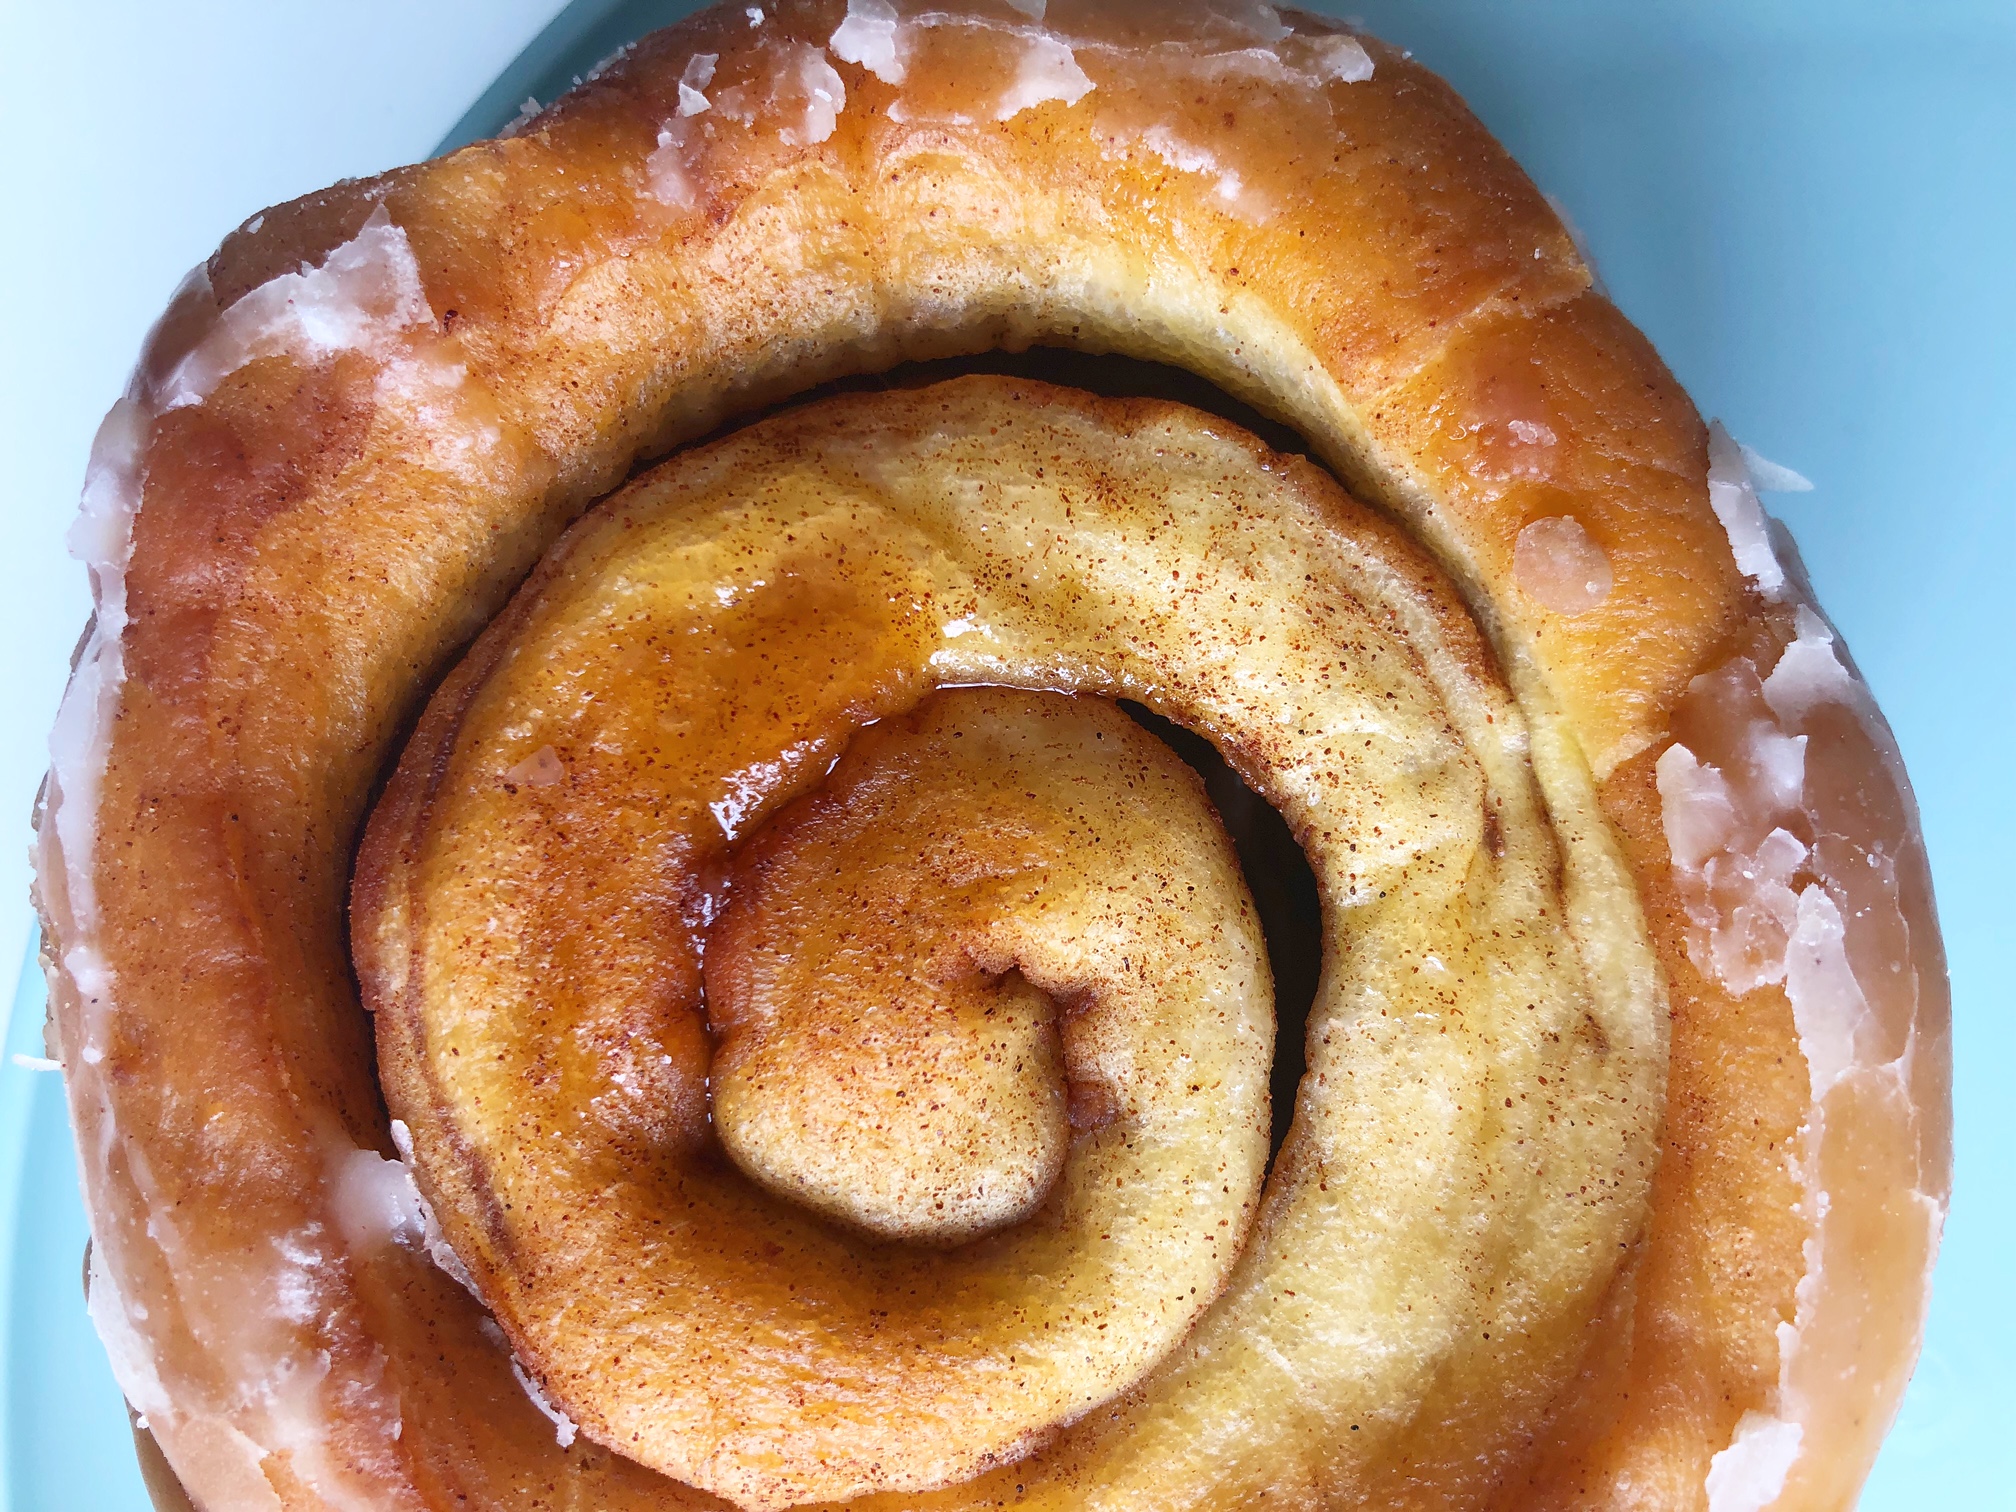 A close photo of the underside of a cinnamon roll donut from Ye Olde Donut Shoppe. Photo by Alyssa Buckley.